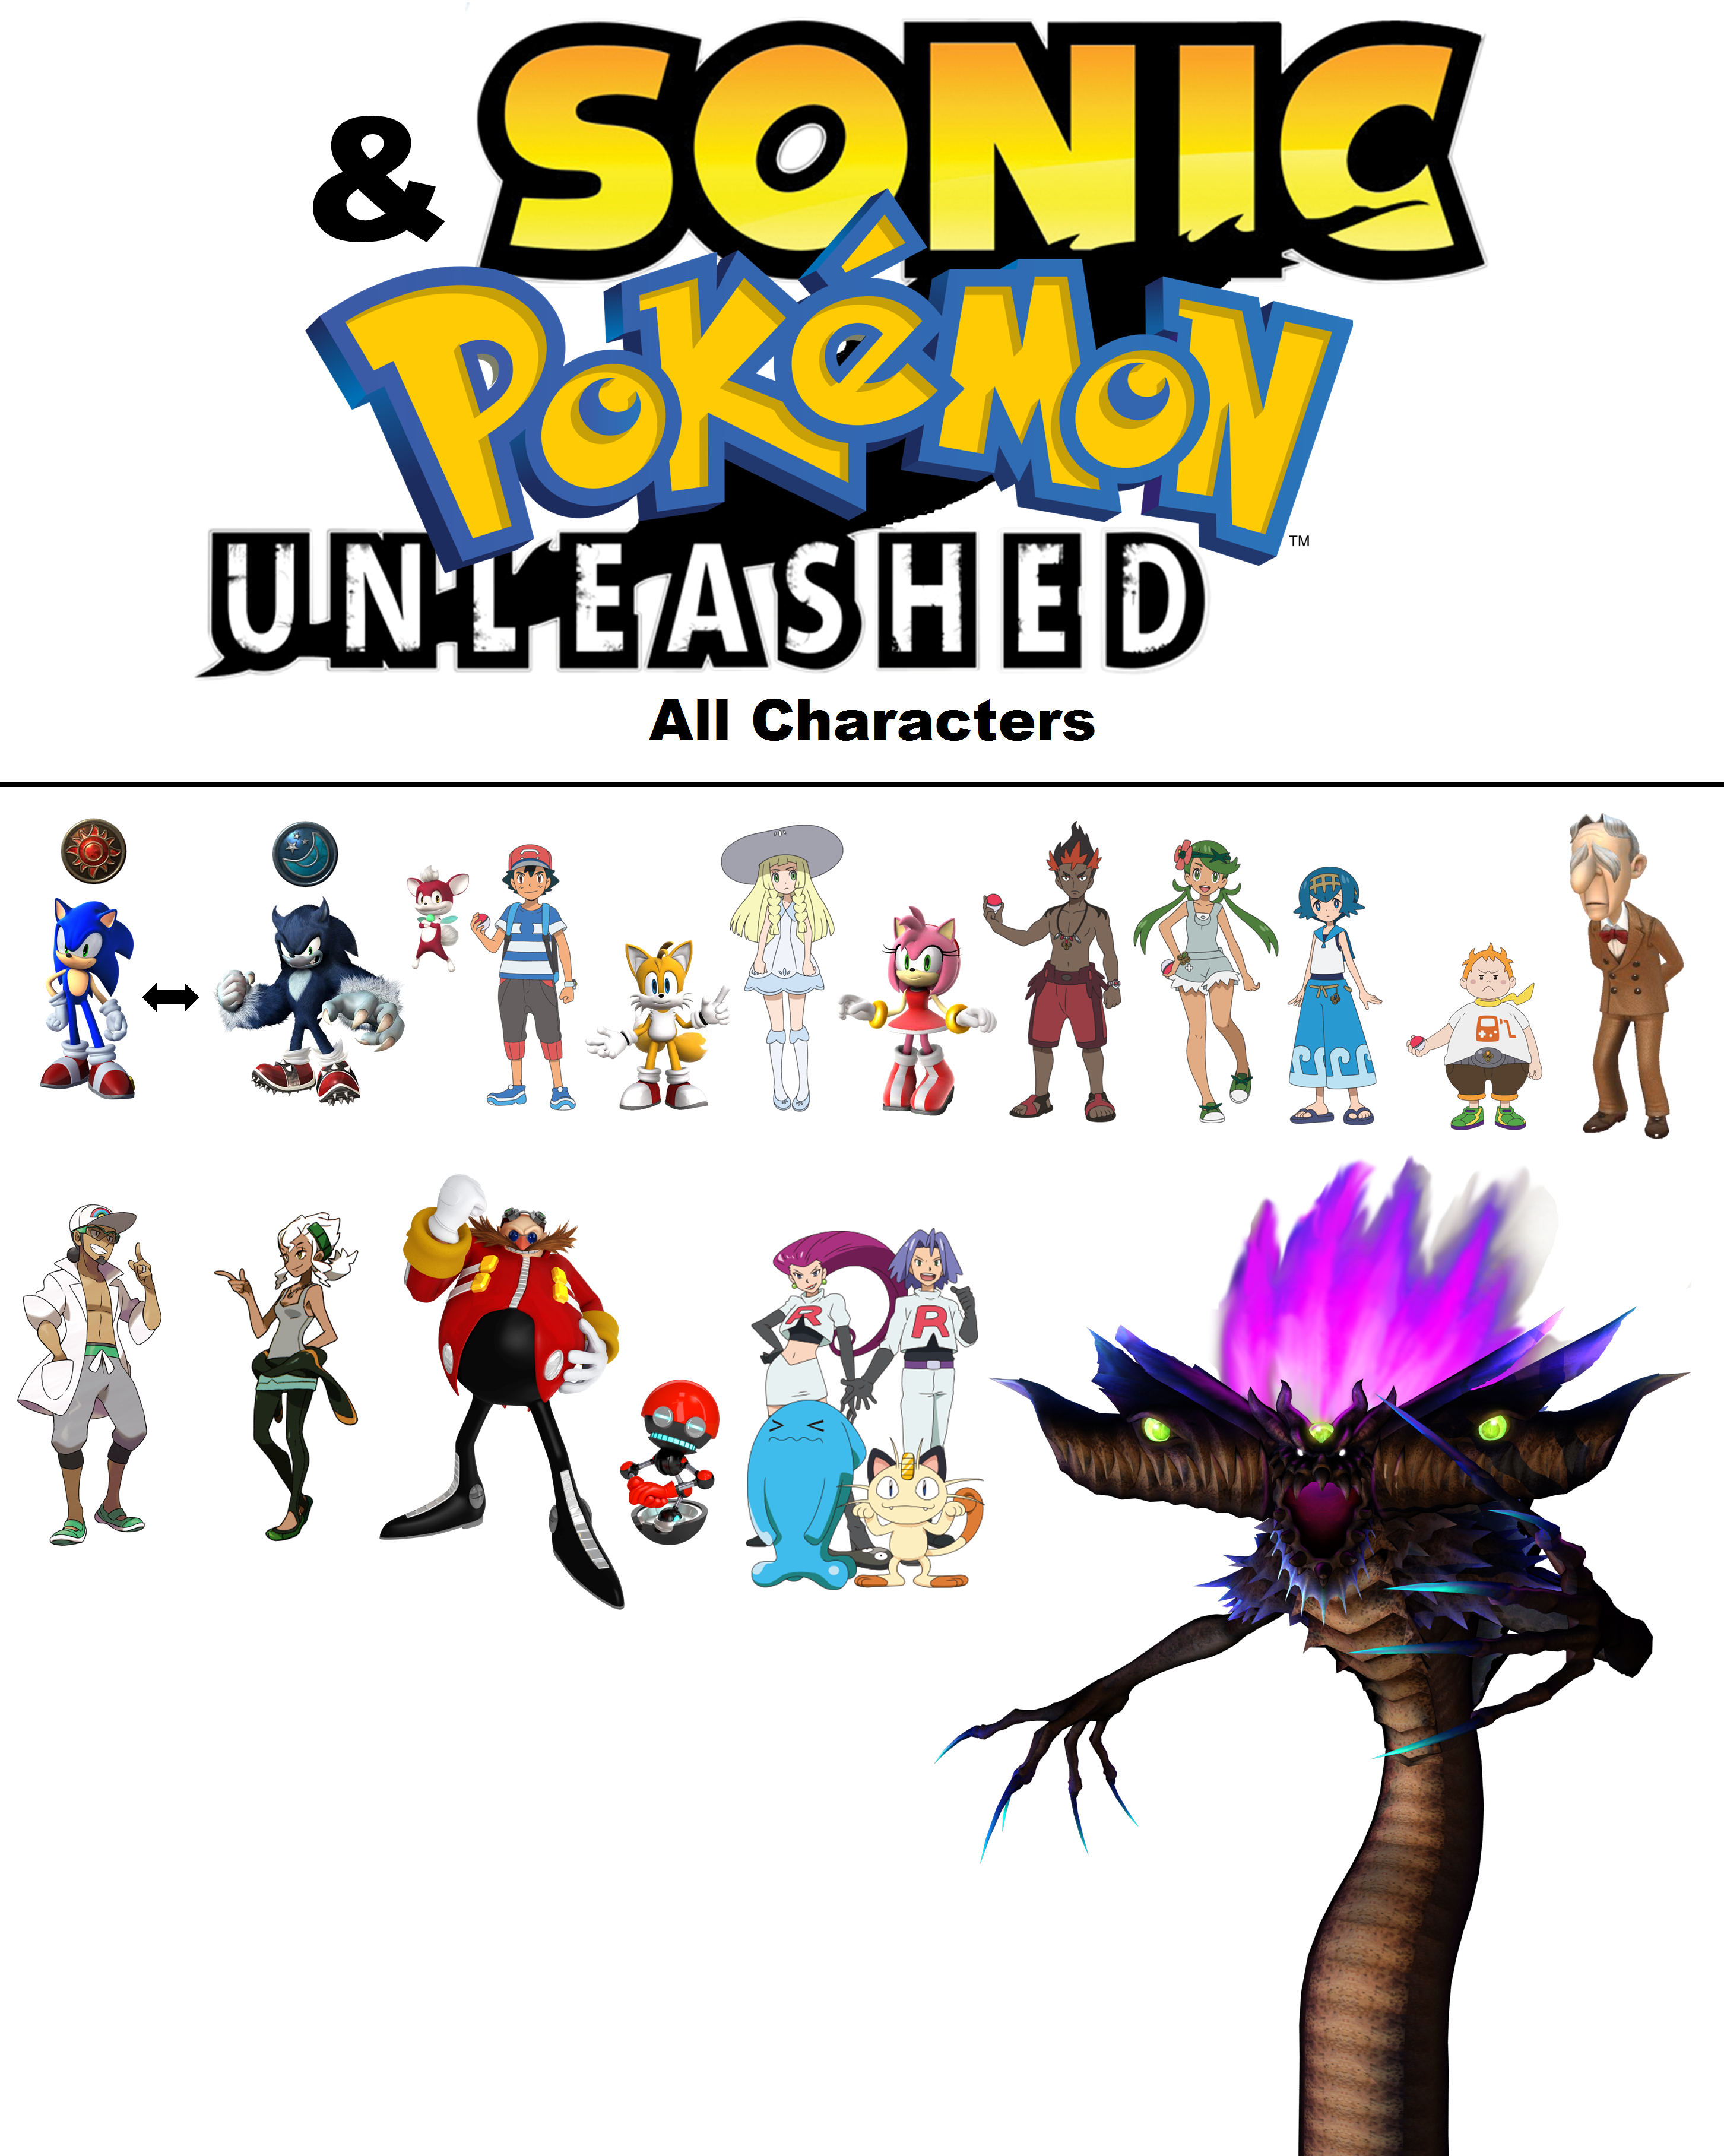 Sonic And Pokemon Unleashed All Characters By Csillag Jozef On Deviantart